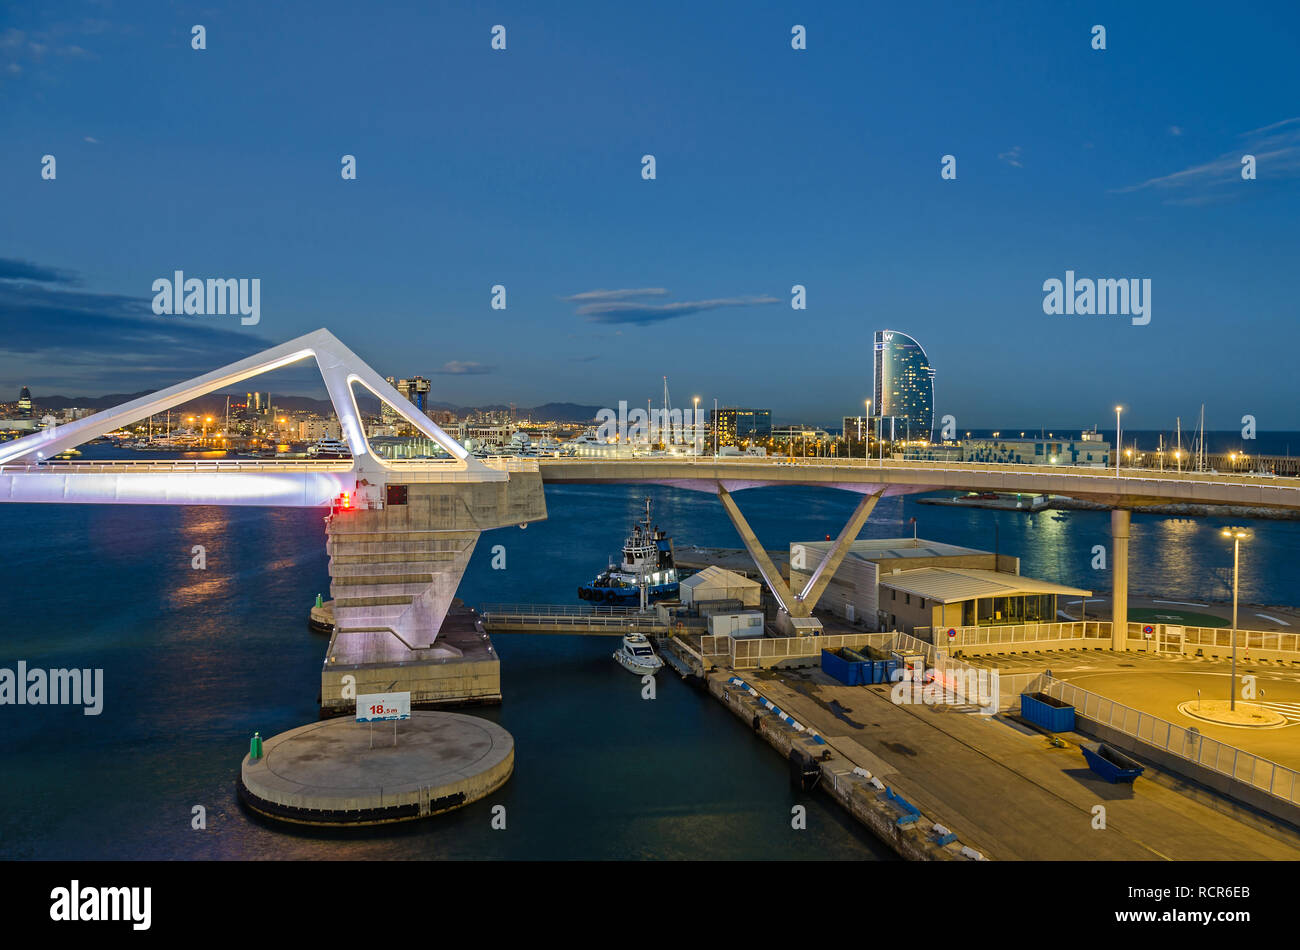 Barcelona, Spain - November 10, 2018: Port Vell with its cruise terminal, bascule bridge Porta d'Europa, helicopter pad and W Barcelona, also known as Stock Photo